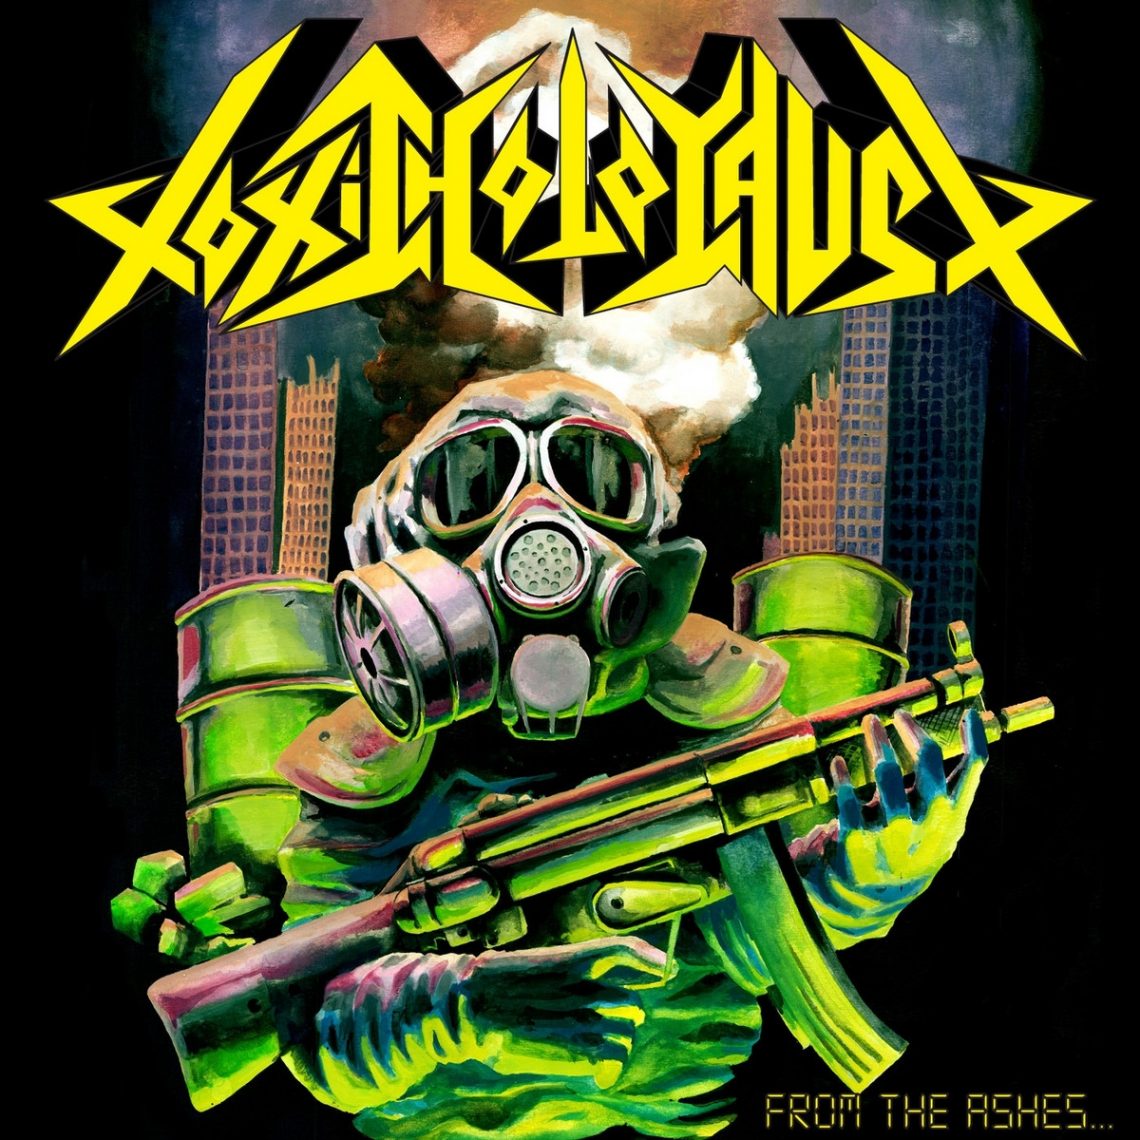 Toxic Holocaust – From The Ashes of Nuclear Destruction